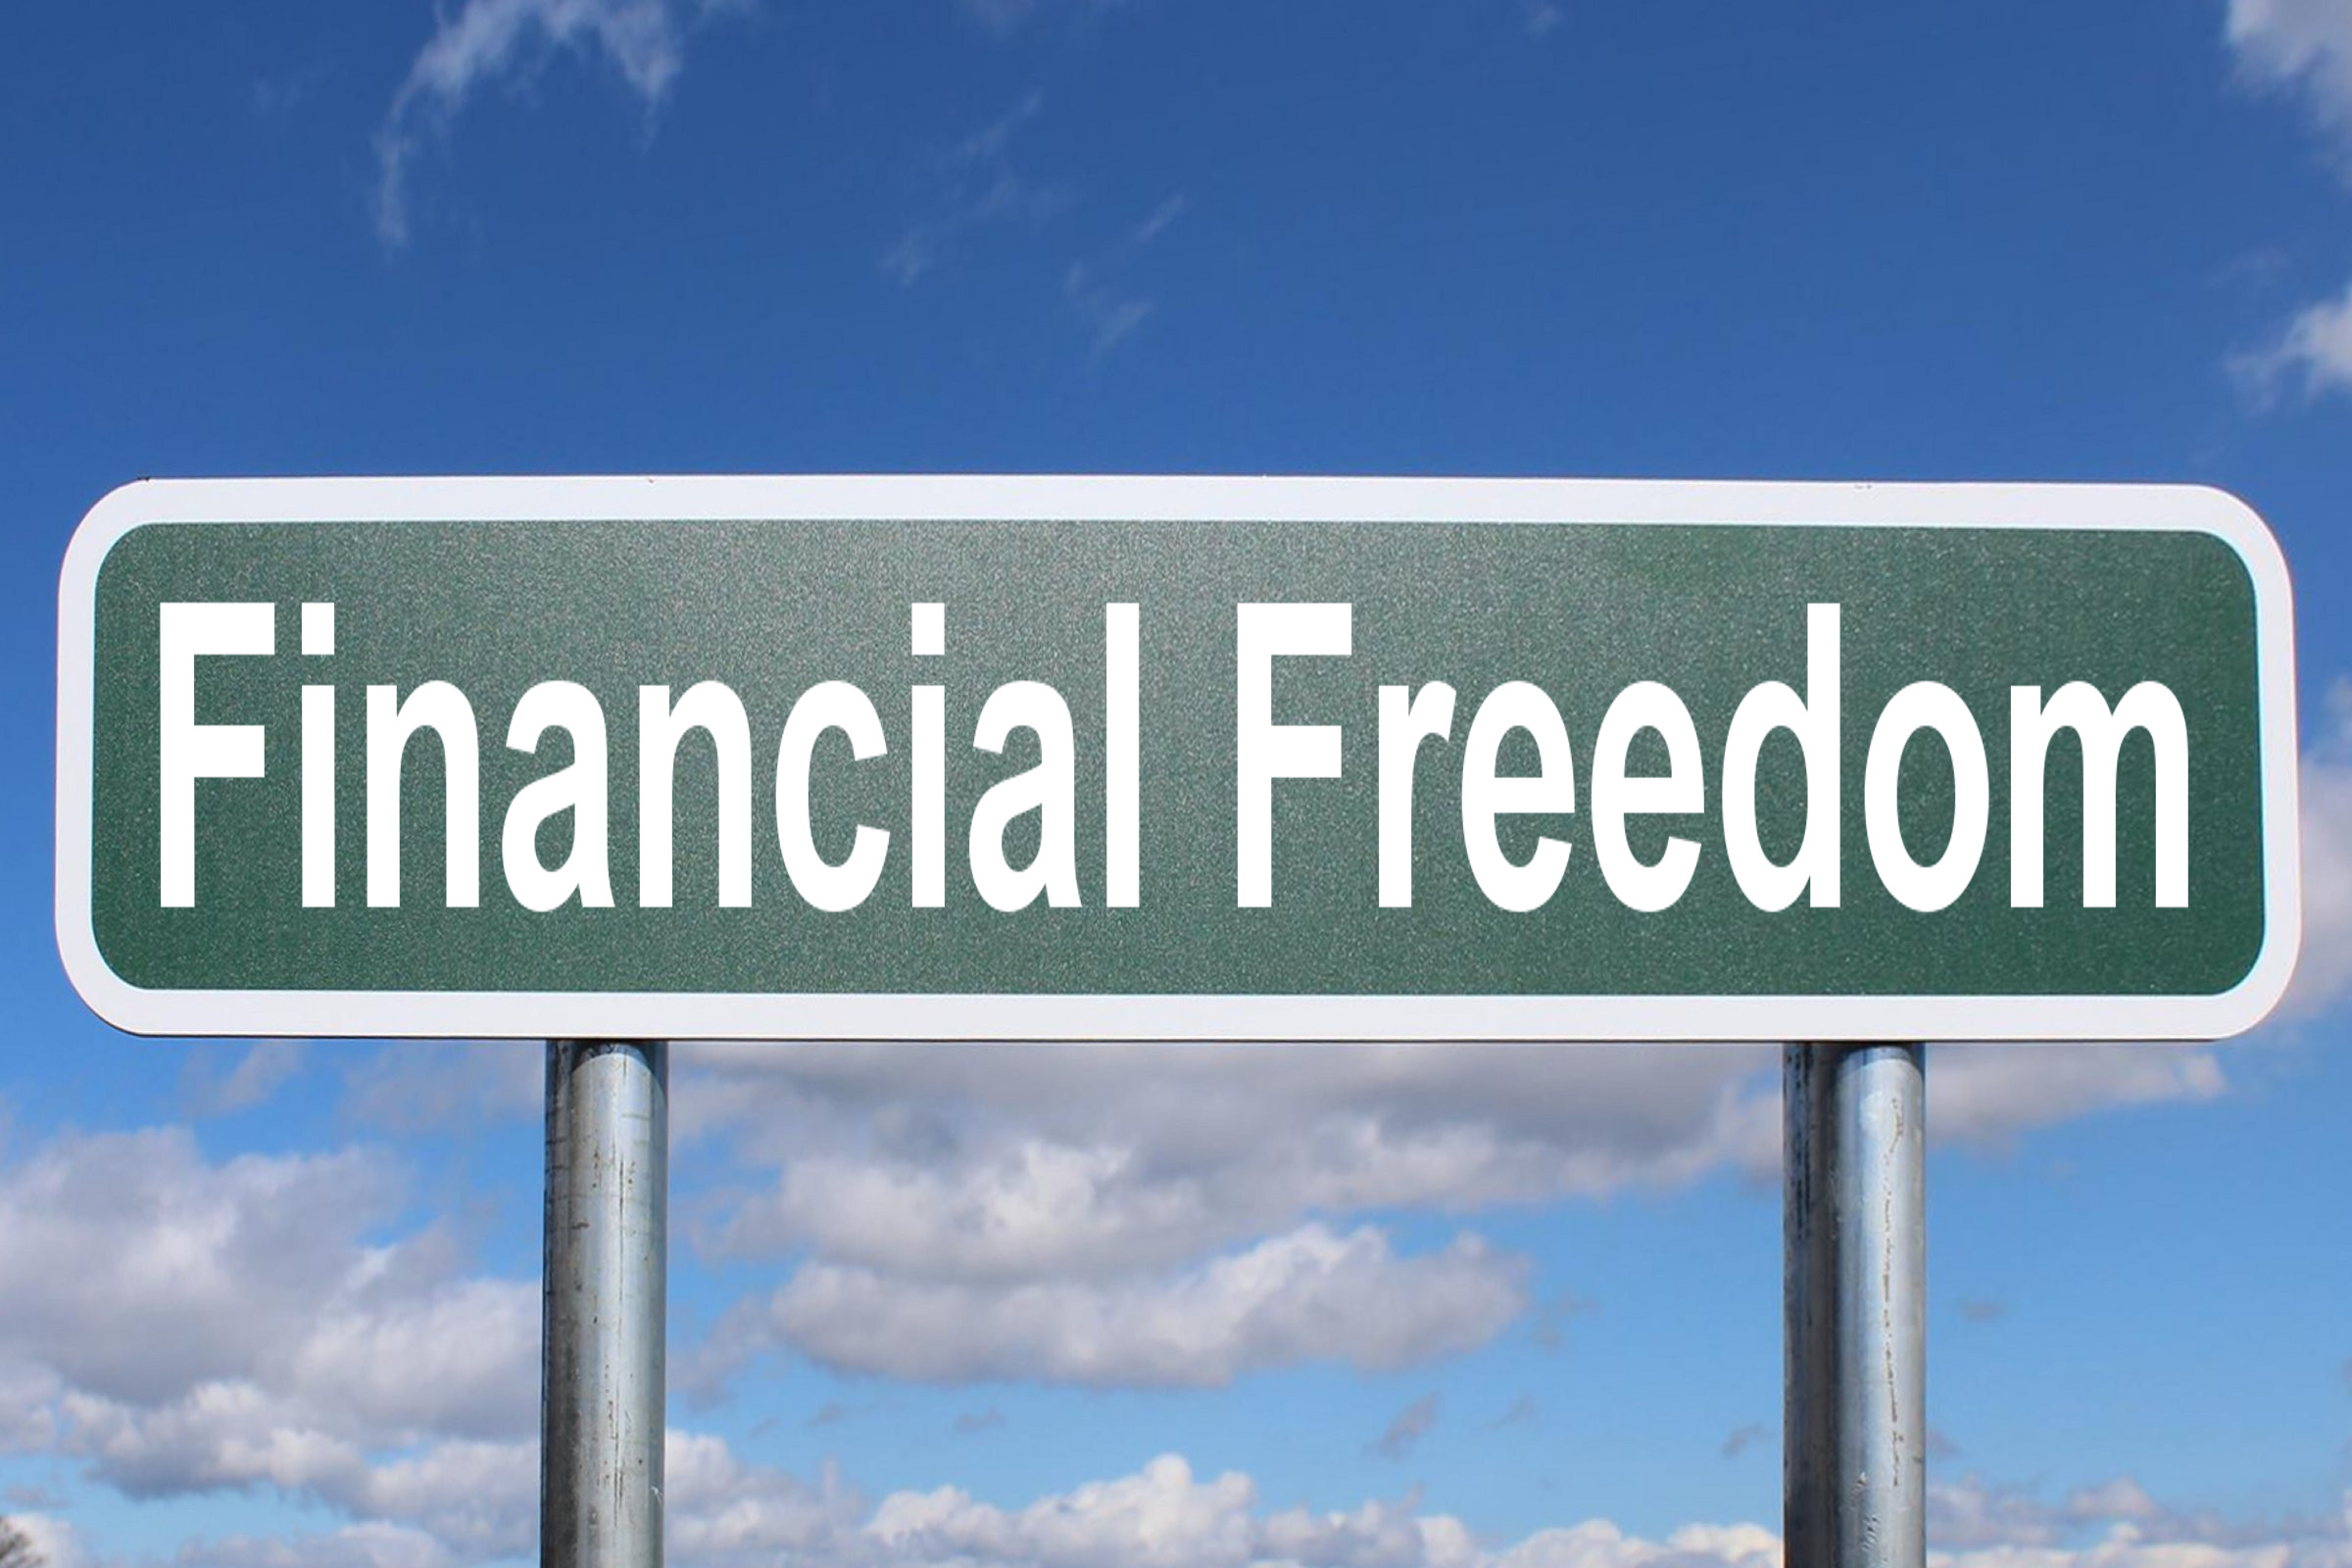 Financial Freedom - Free of Charge Creative Commons Highway sign image